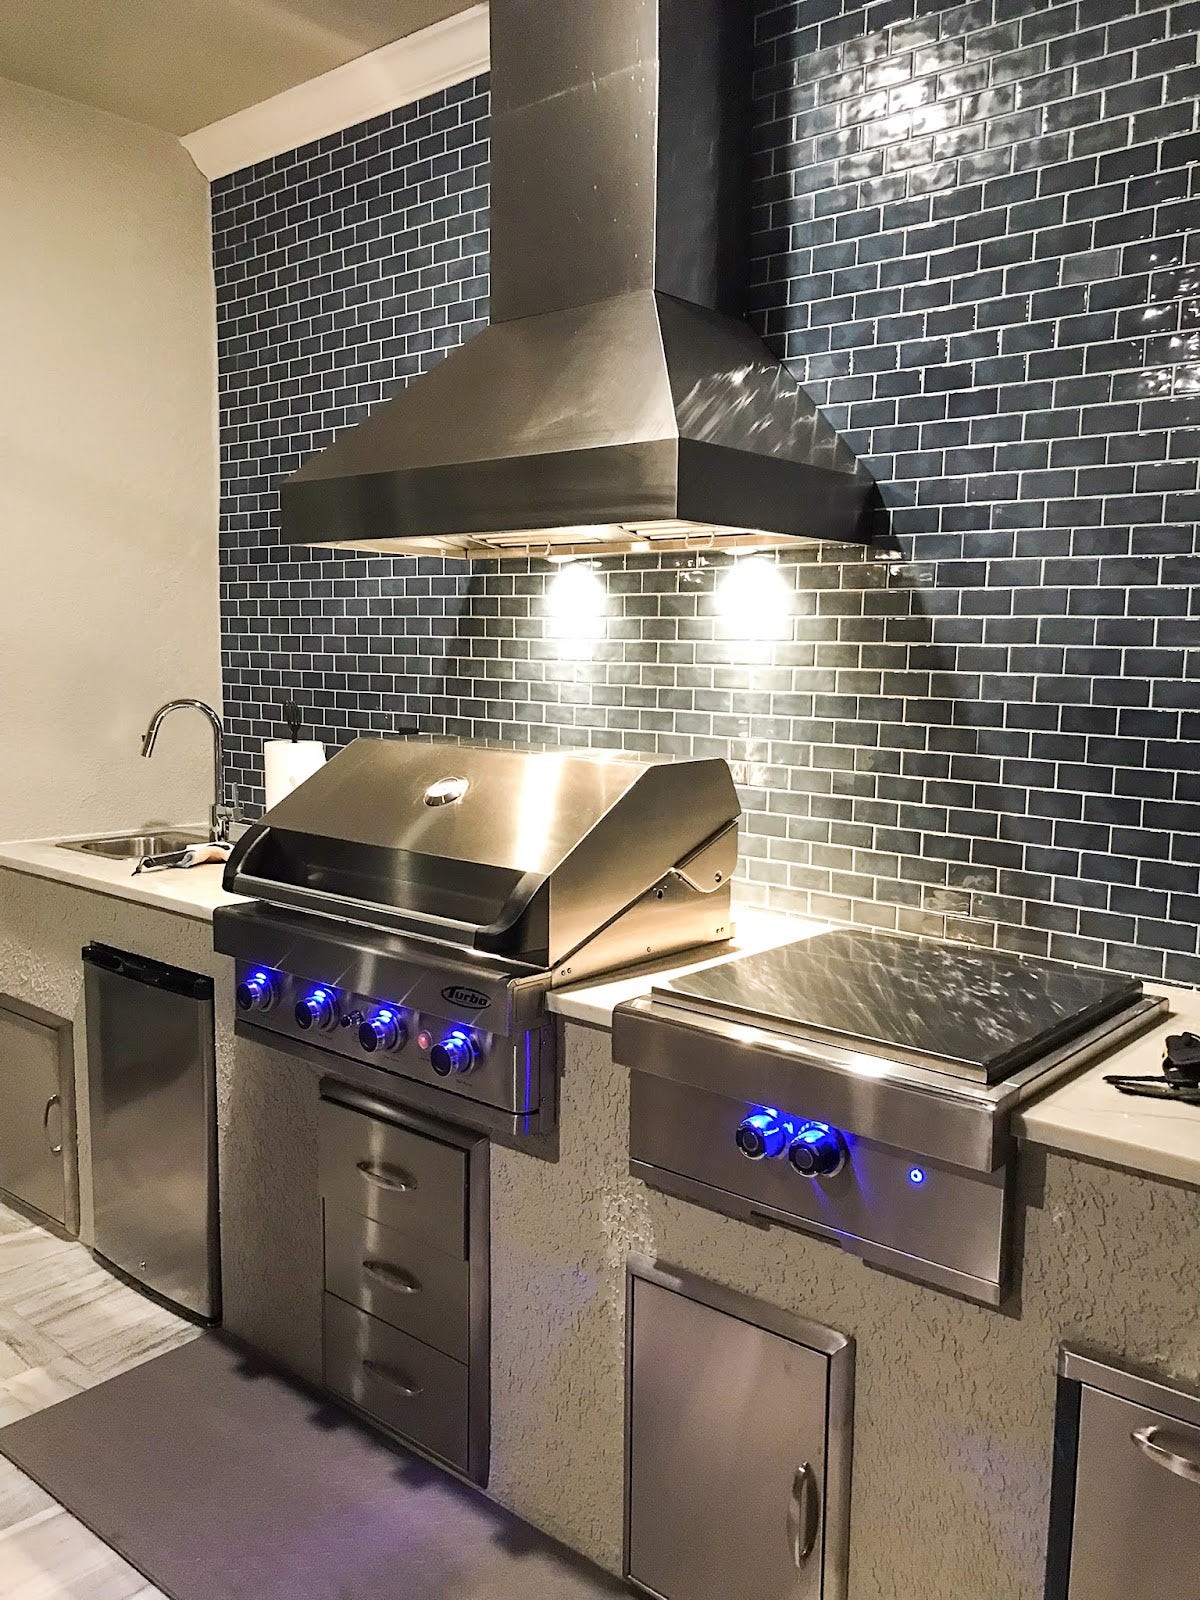 Chic outdoor kitchen grill area with a Proline range hood, illuminated by under-hood lighting, against a backdrop of dark subway tiles - prolinerangehoods.com.